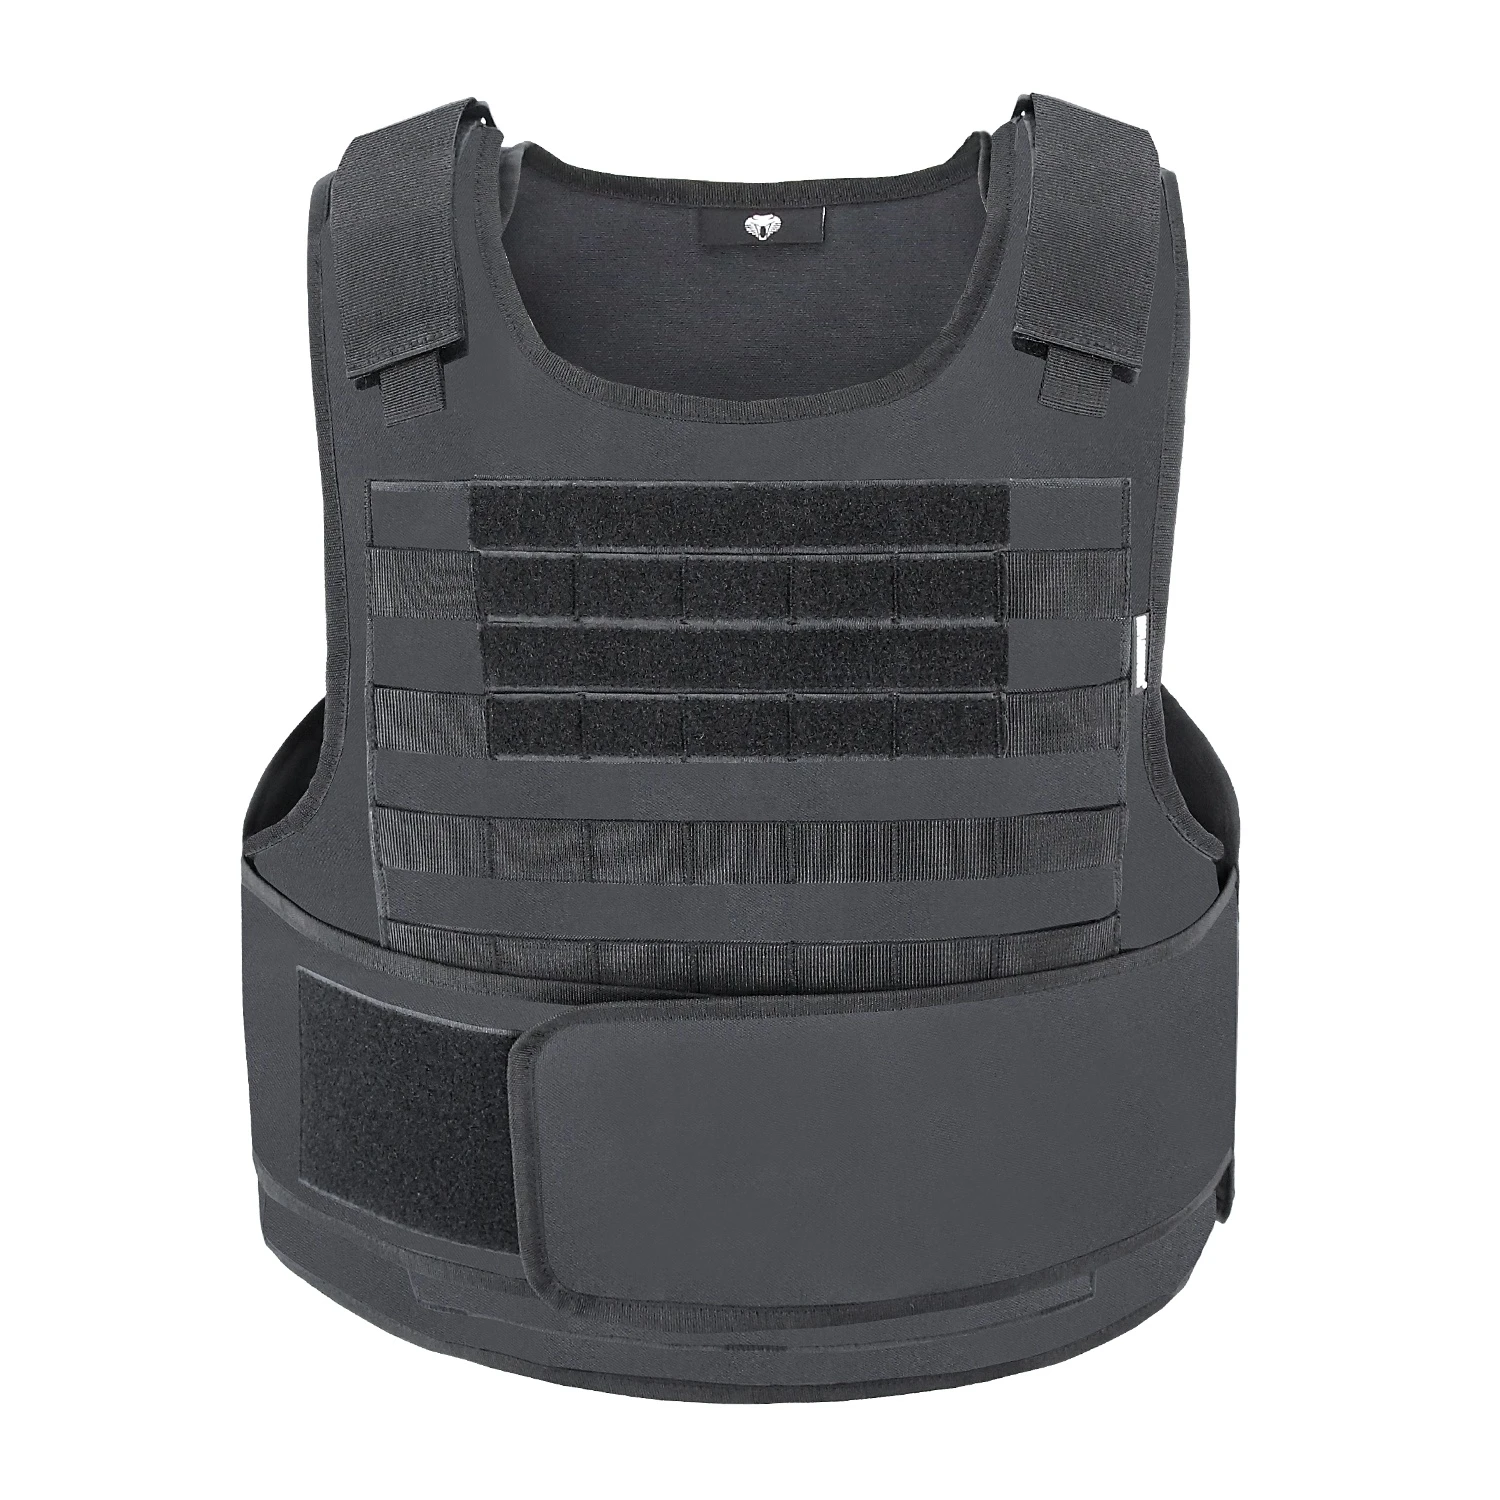 KMS Air Soft Military Bullet Proof Vest Safety Tactical Plate Carrier Molle Army Vest